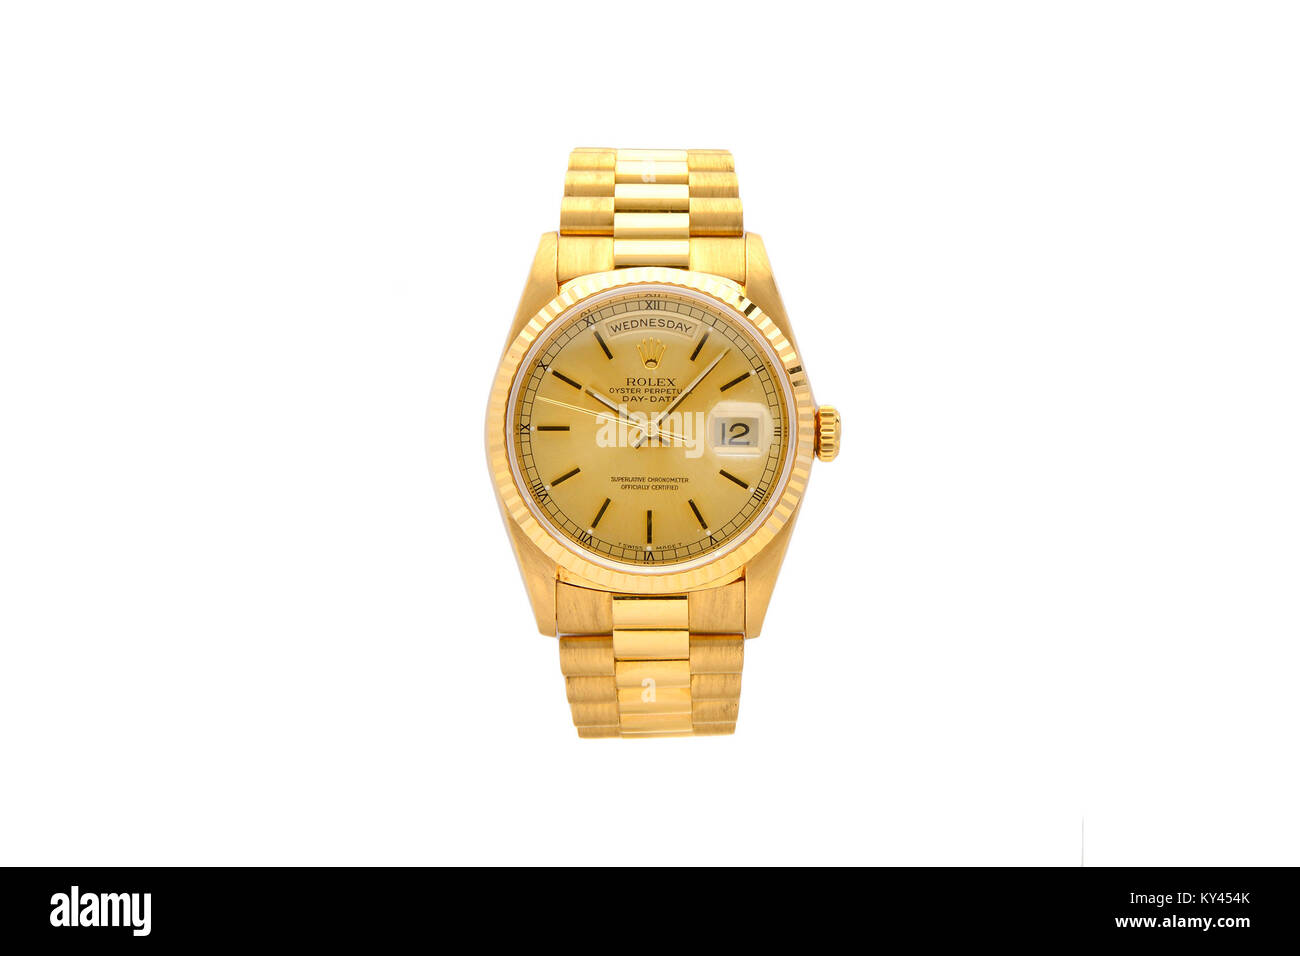 Rolex Oyster gold men's watch with gold face Stock Photo